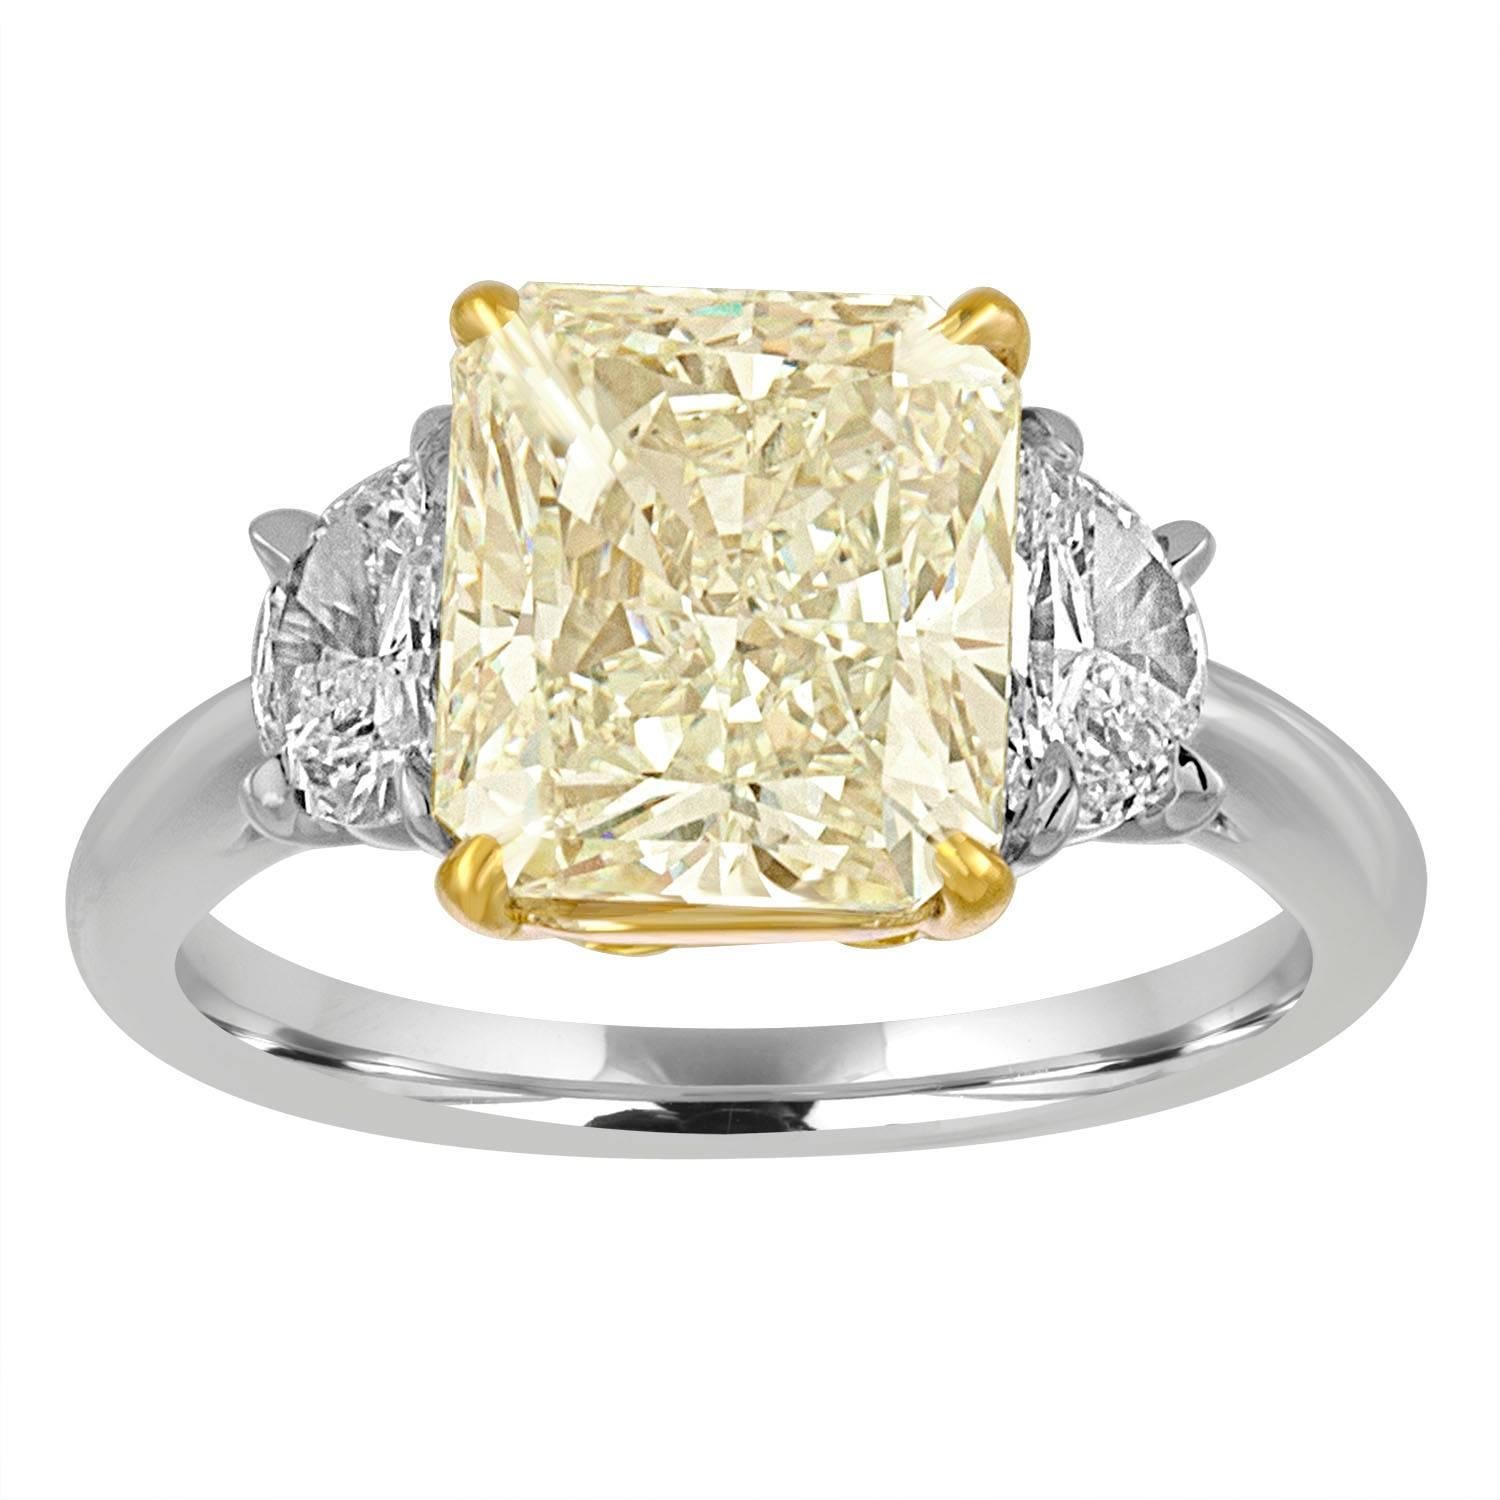 4.01 Carat Radiant Diamond Set with Half Moons in Gold and Platinum Mounting